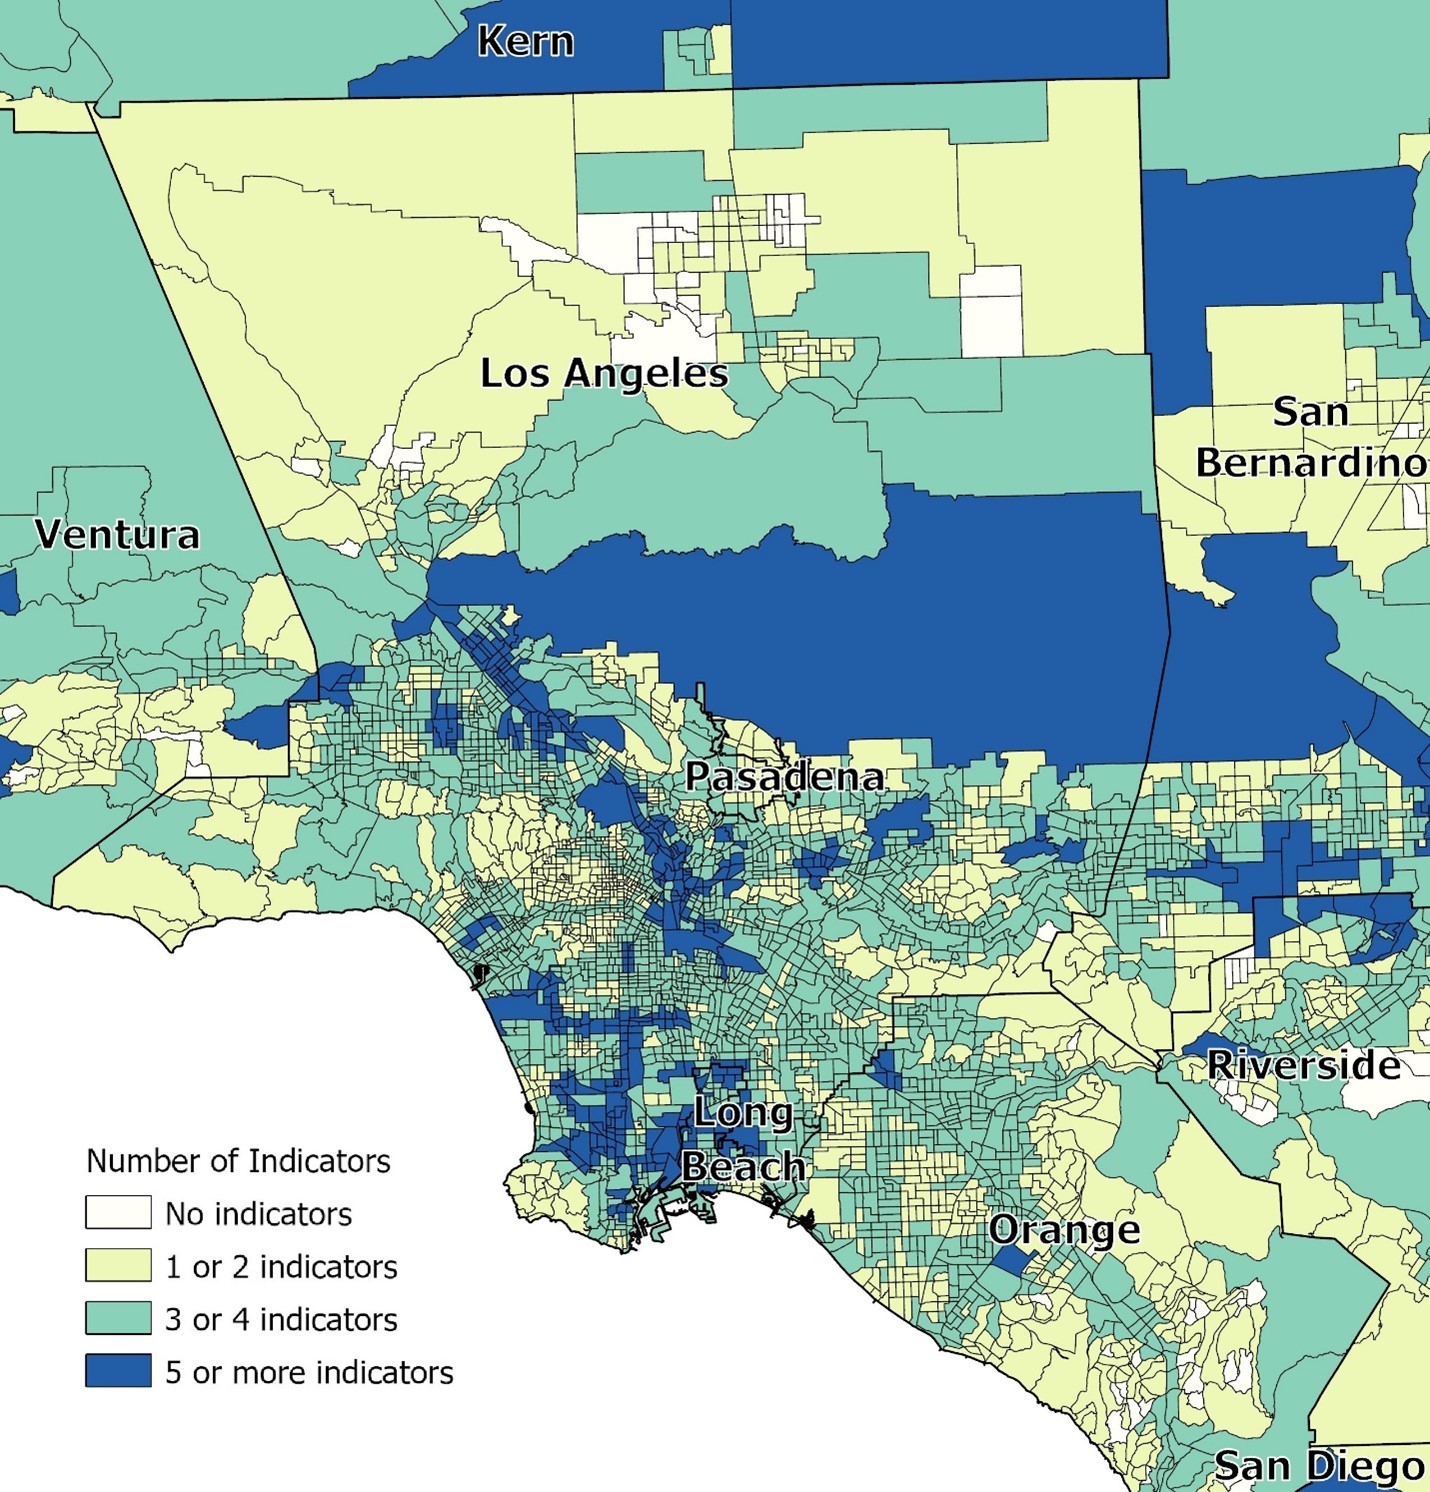 Map 2: Los Angeles area local health jurisdictions' census tracts by number of geospatial indicators of risk for childhood lead 